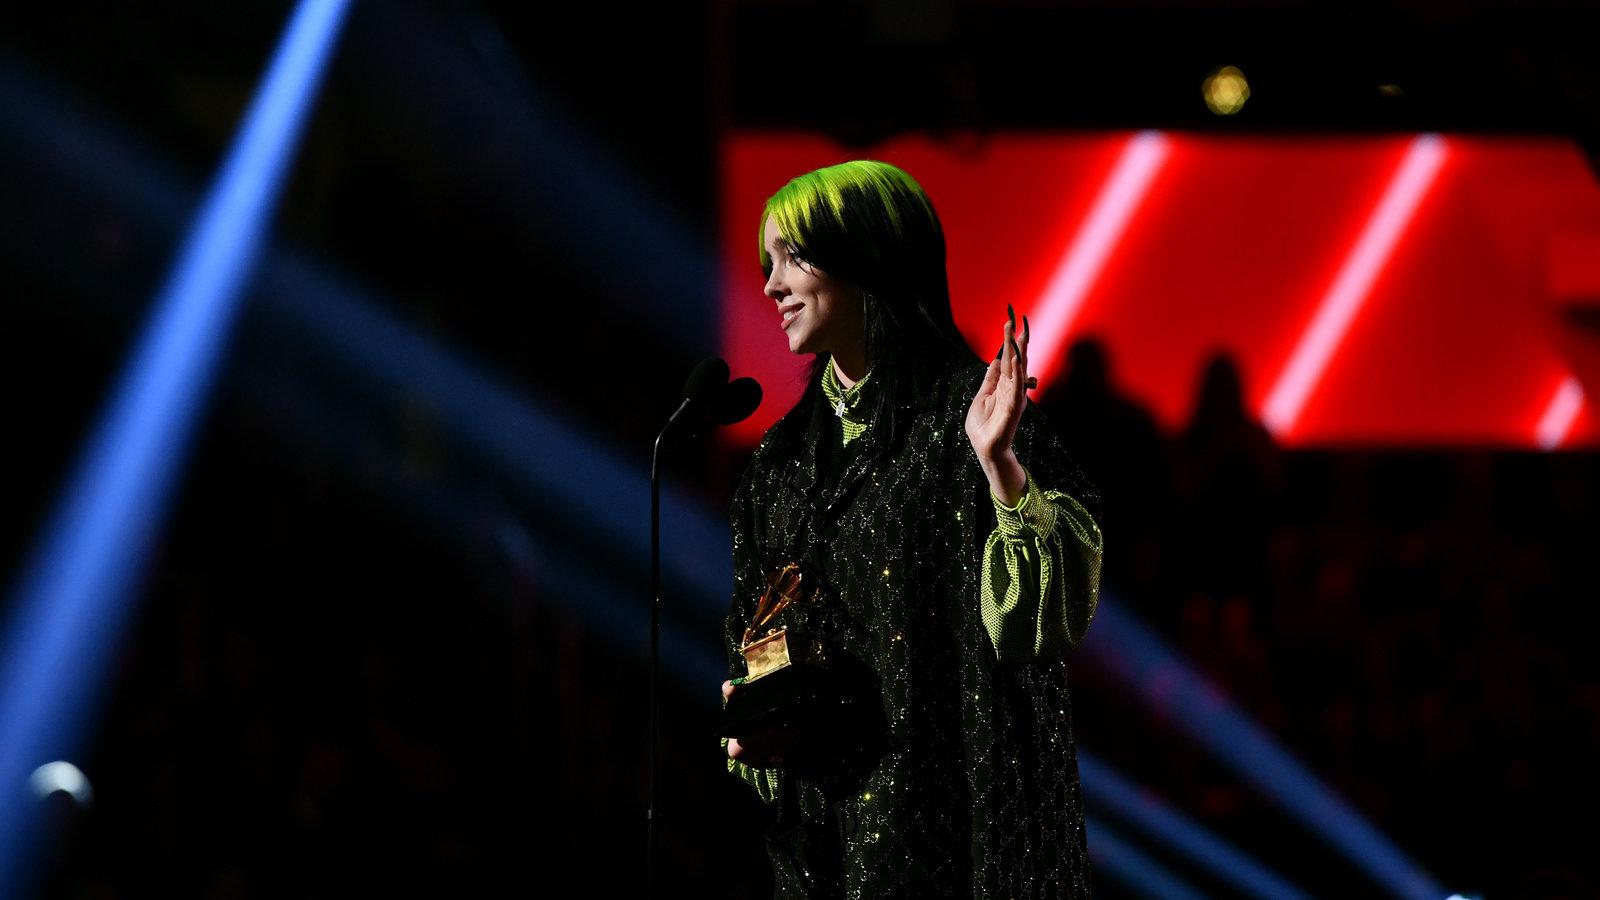 Grammy Awards Hit 12 Year Low In TV Viewers